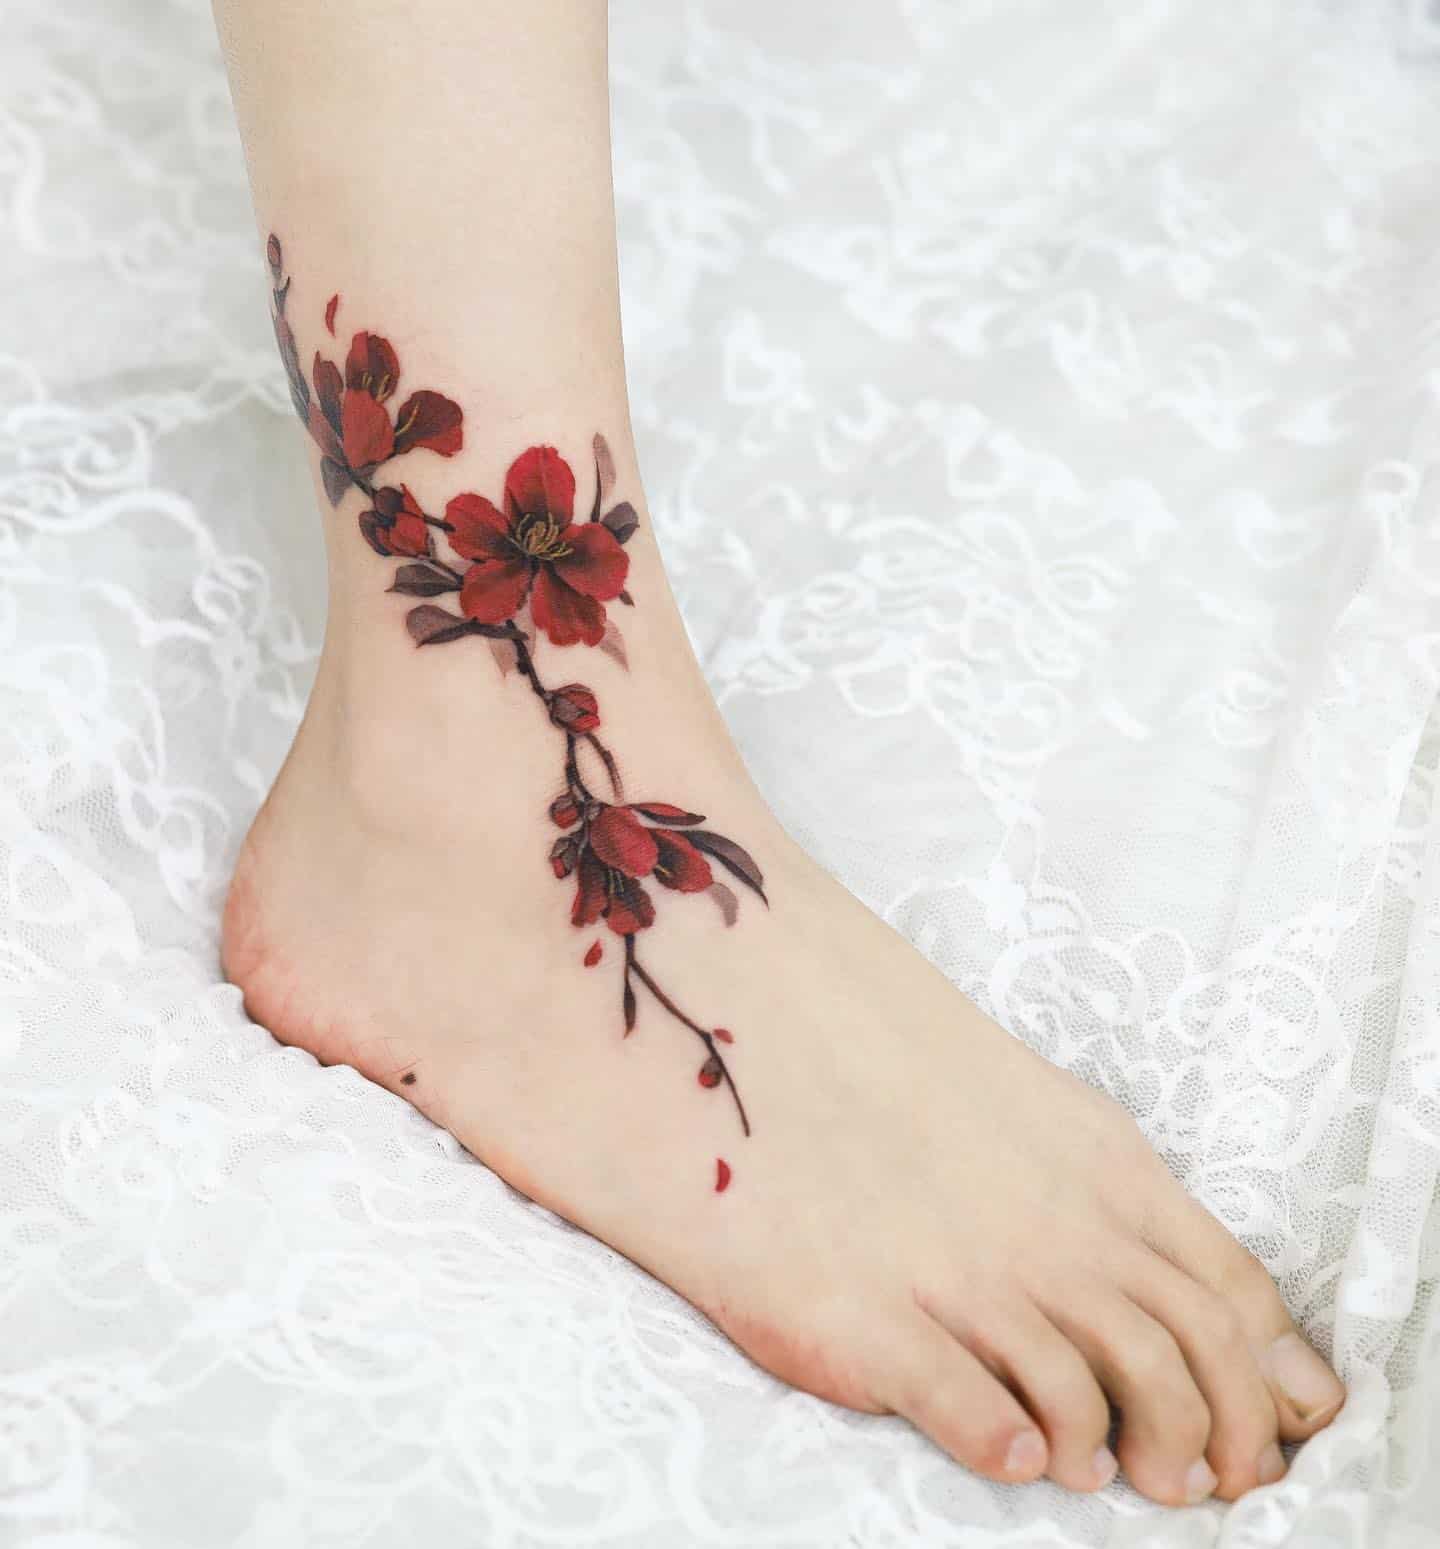 Cherry Blossom Tattoo Meaning Designs Ideas And Much More